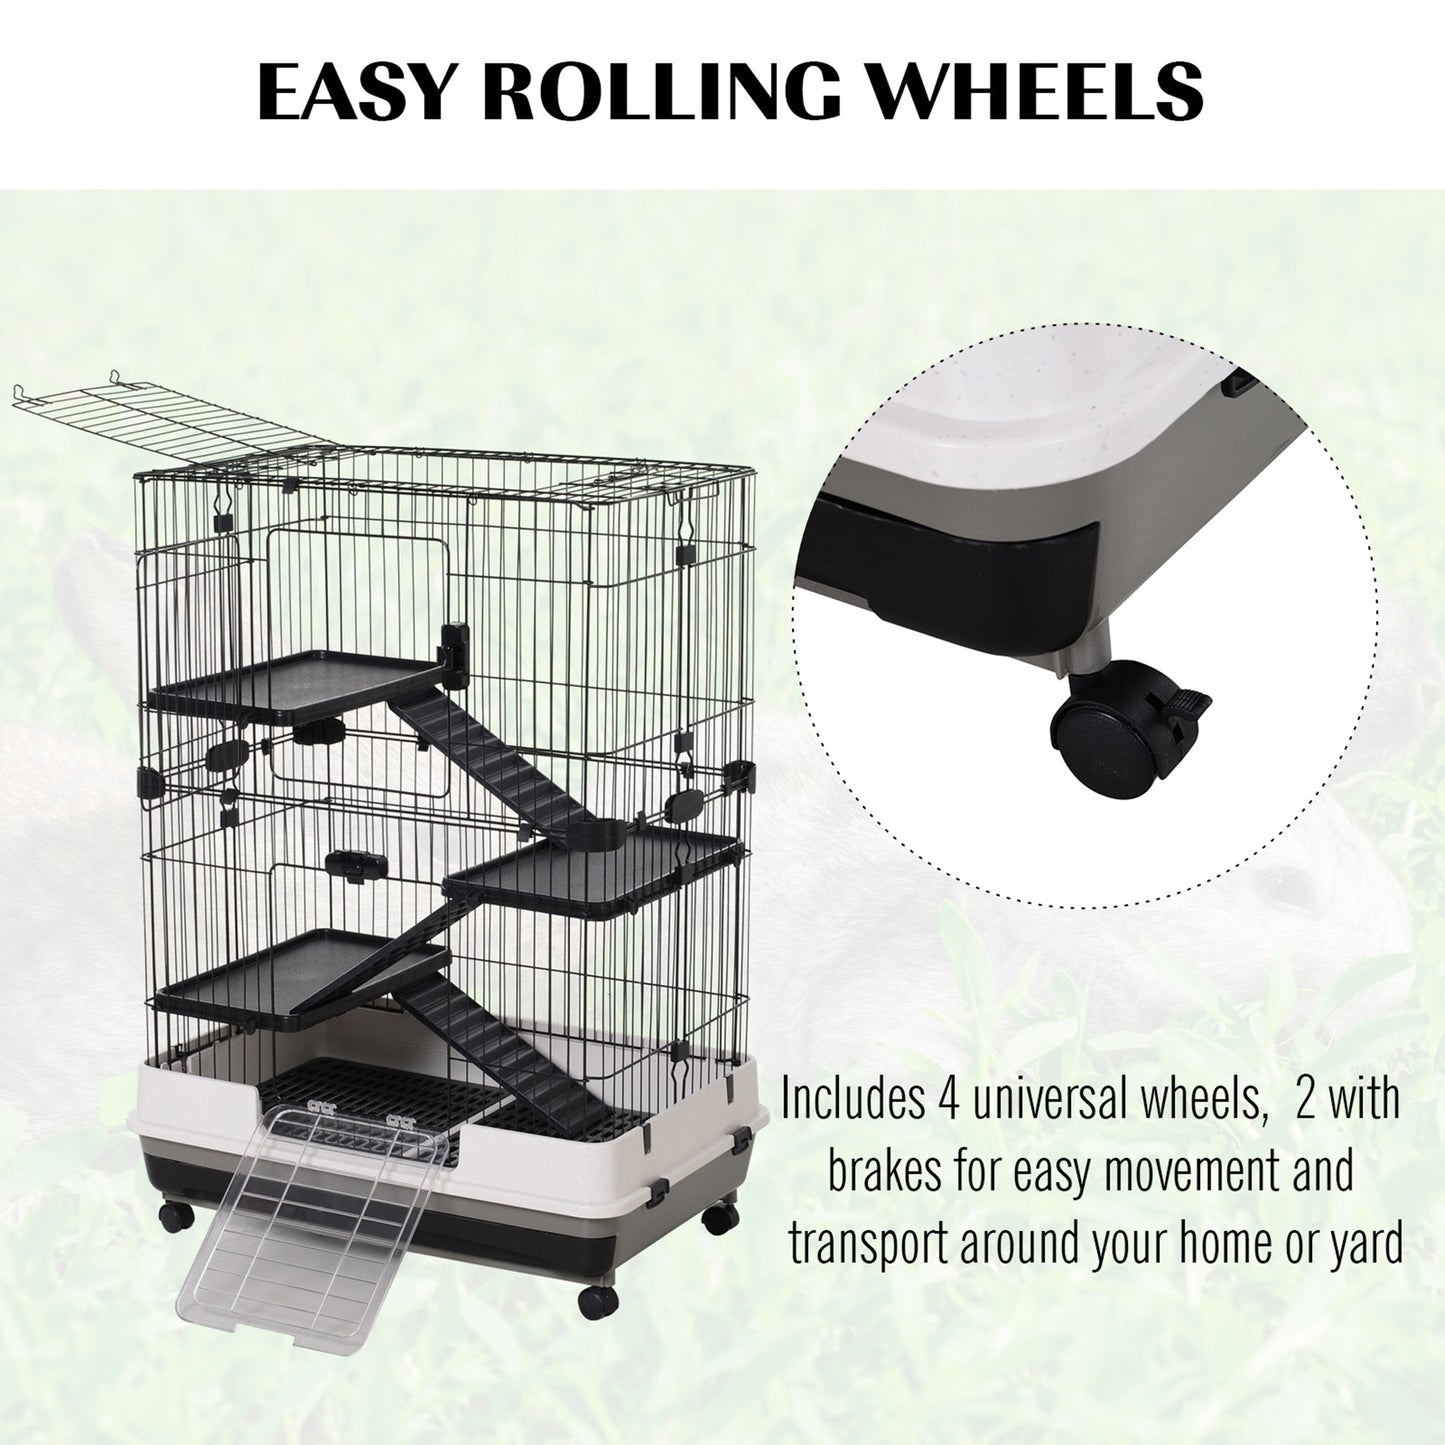 32"L 4-Level Small Animal Cage Rabbit Hutch with Universal Lockable Wheels, Slide-out Tray for Bunny, Chinchillas, Ferret, Black at Gallery Canada